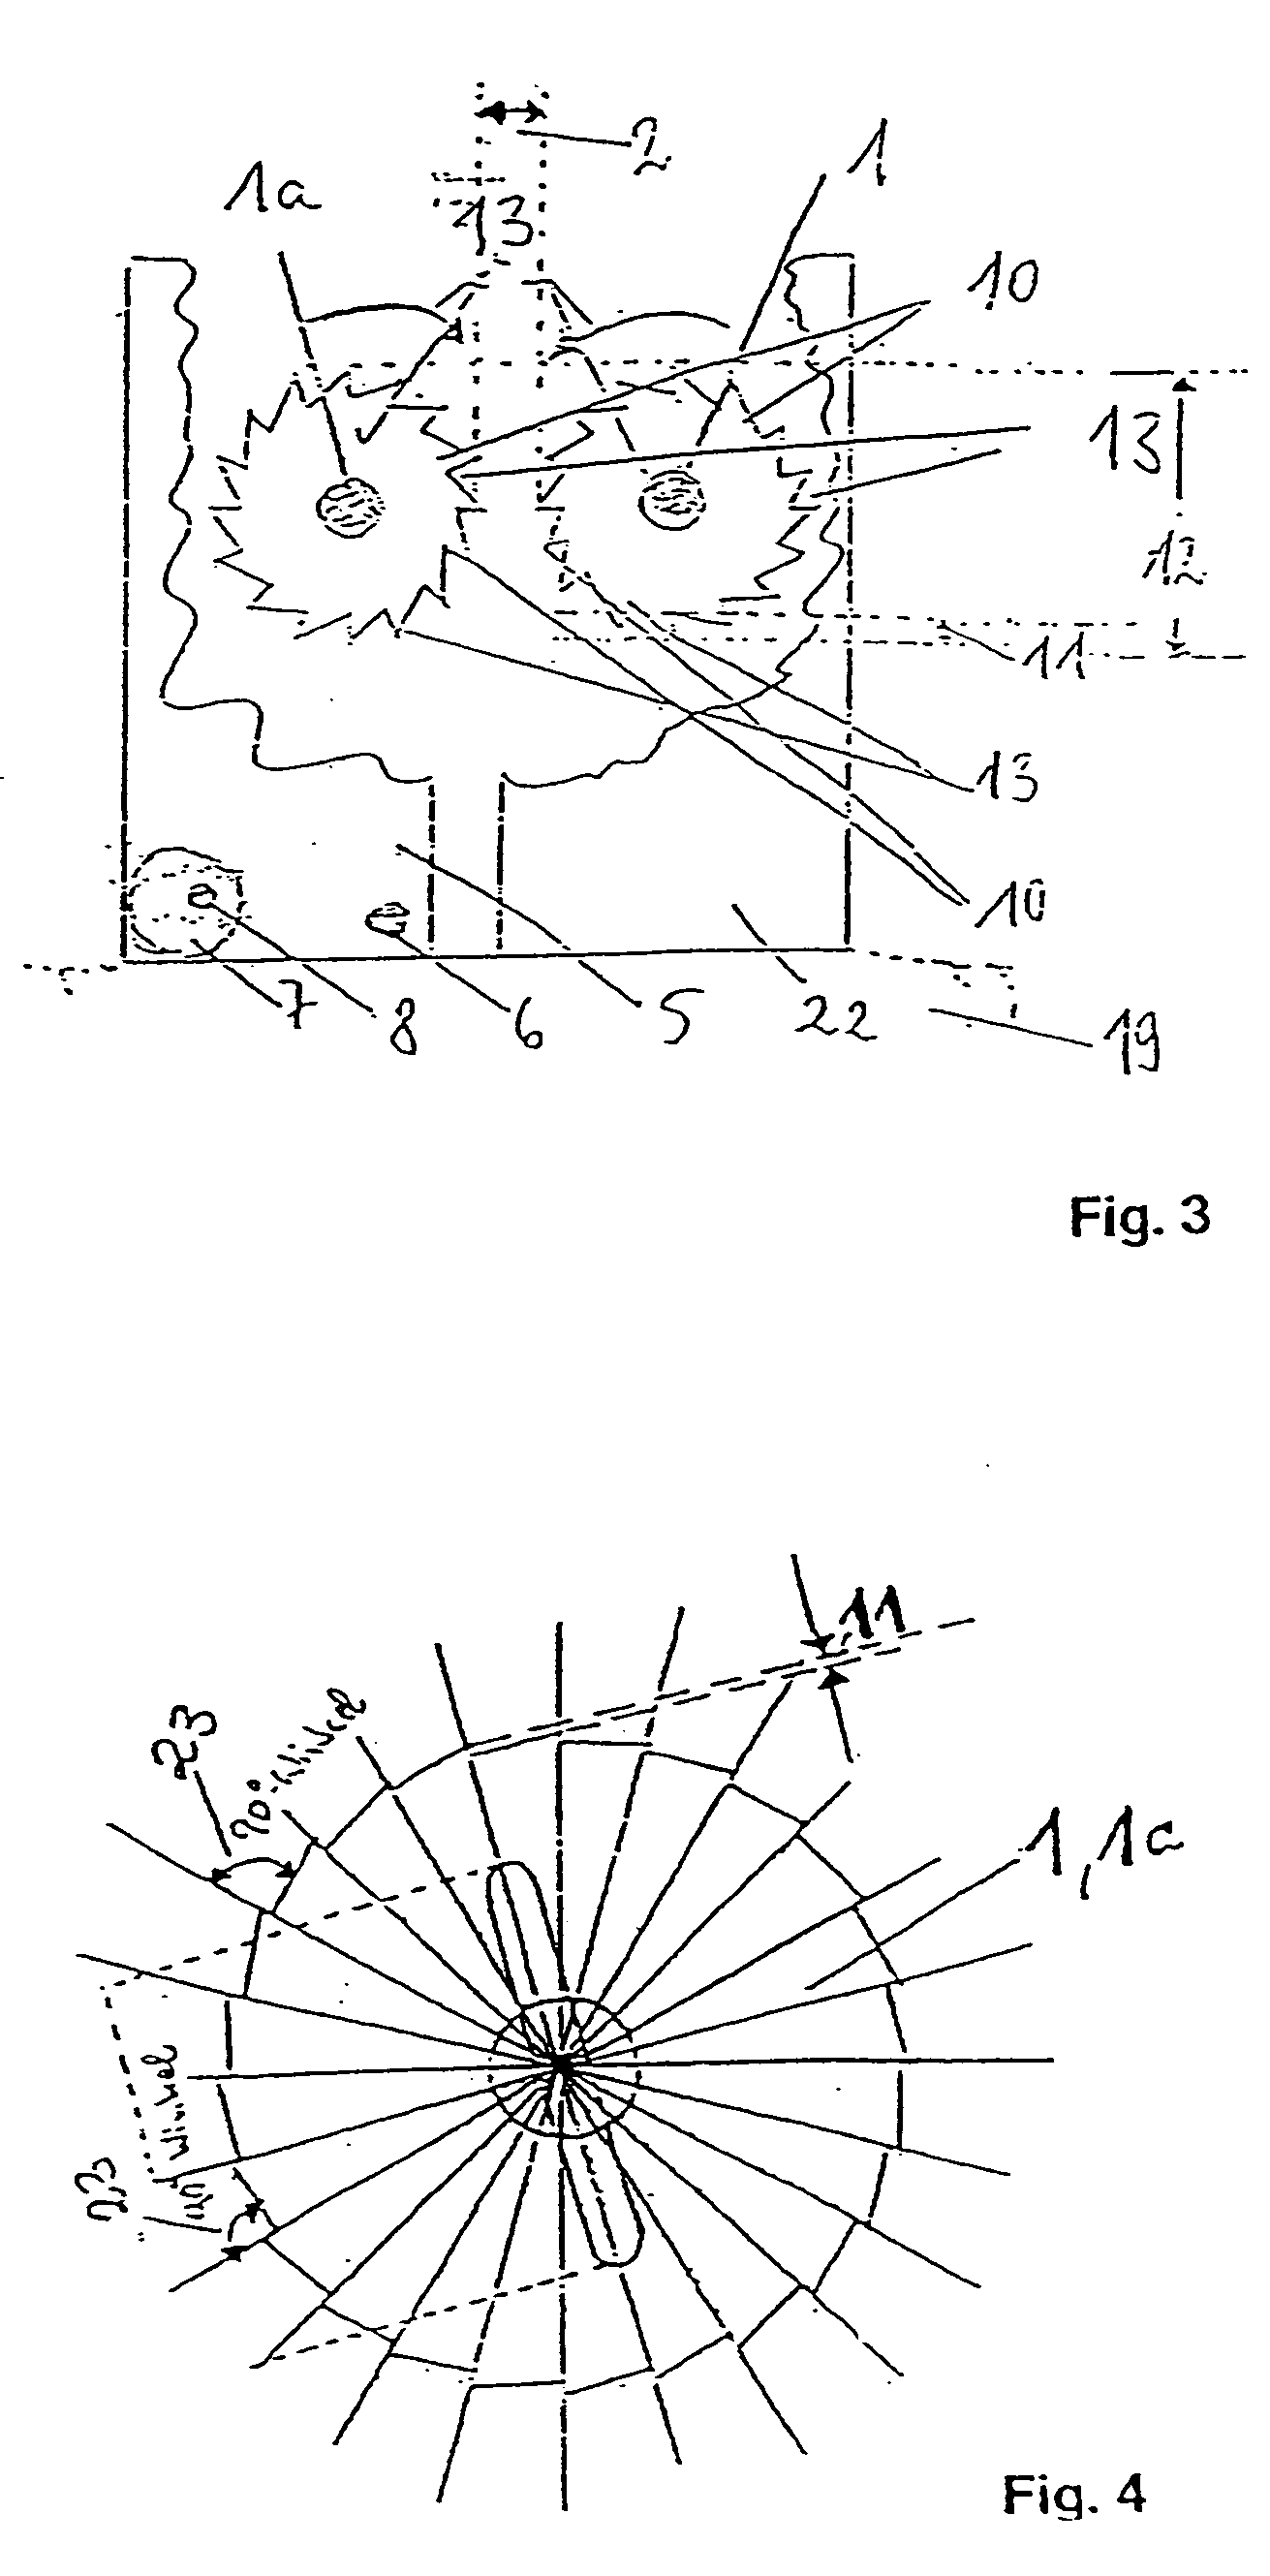 Meat rolling device and method for treating meat